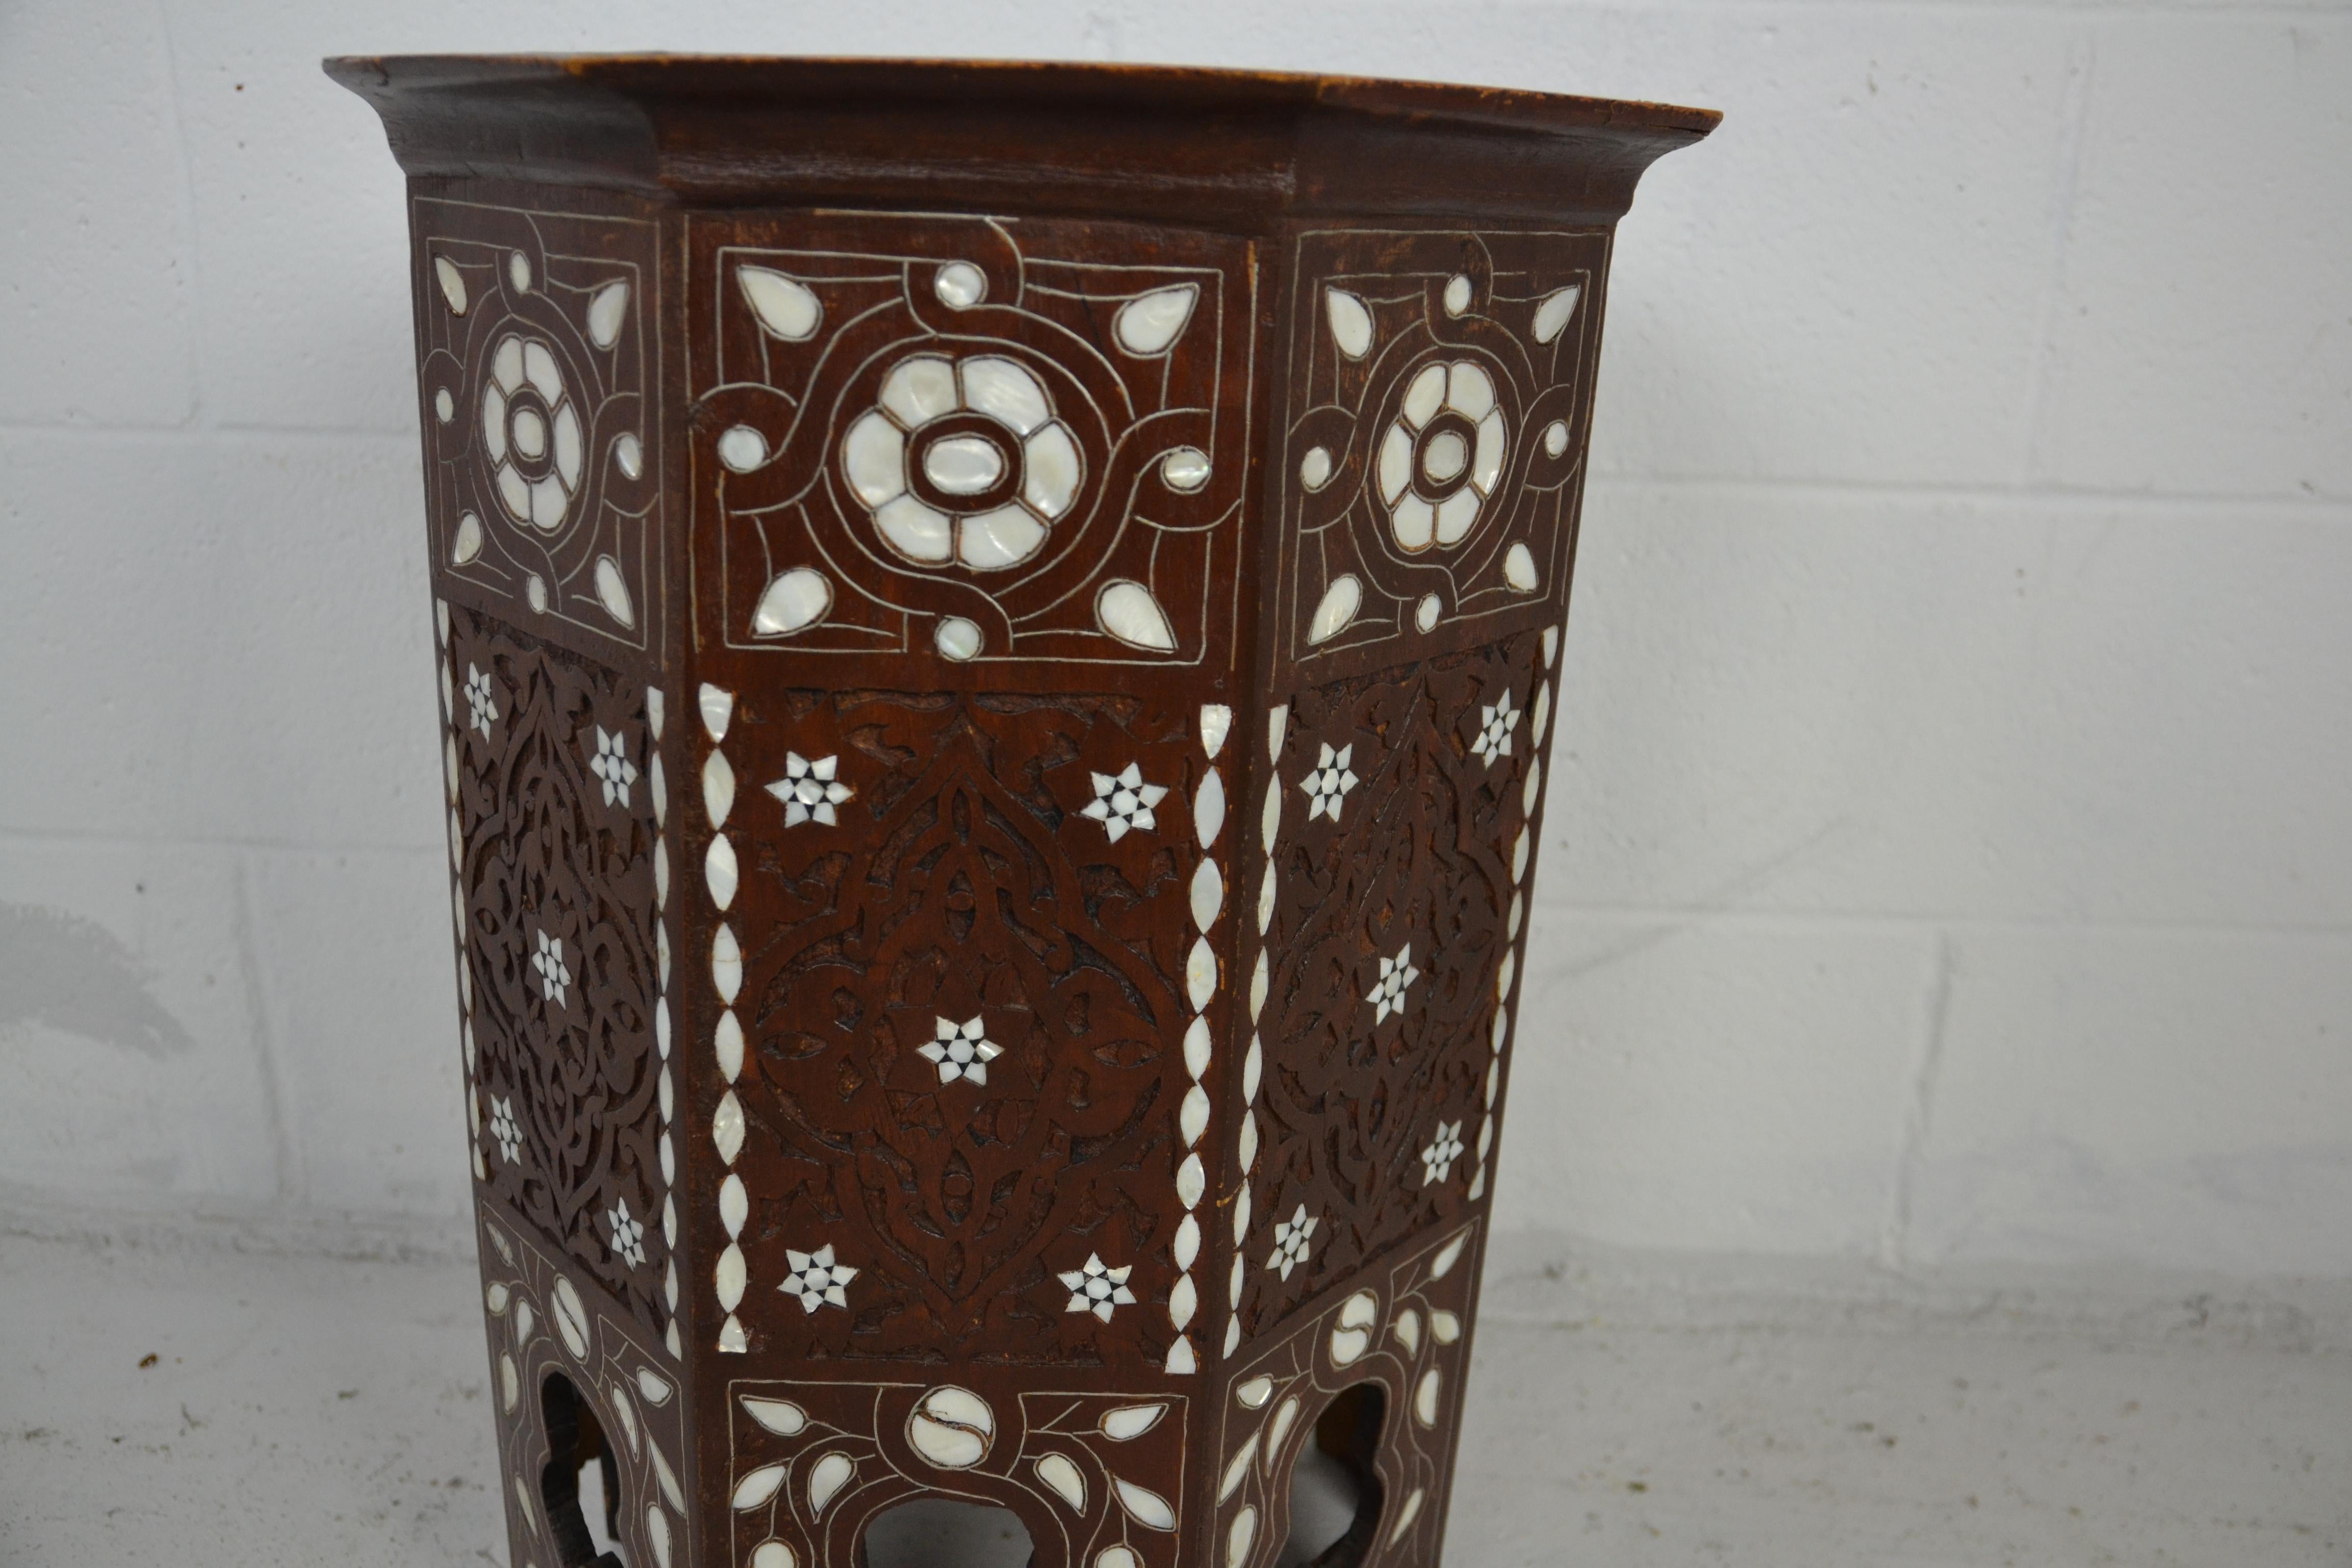 Wood Syrian End Table with Mother of Pearl Inlays